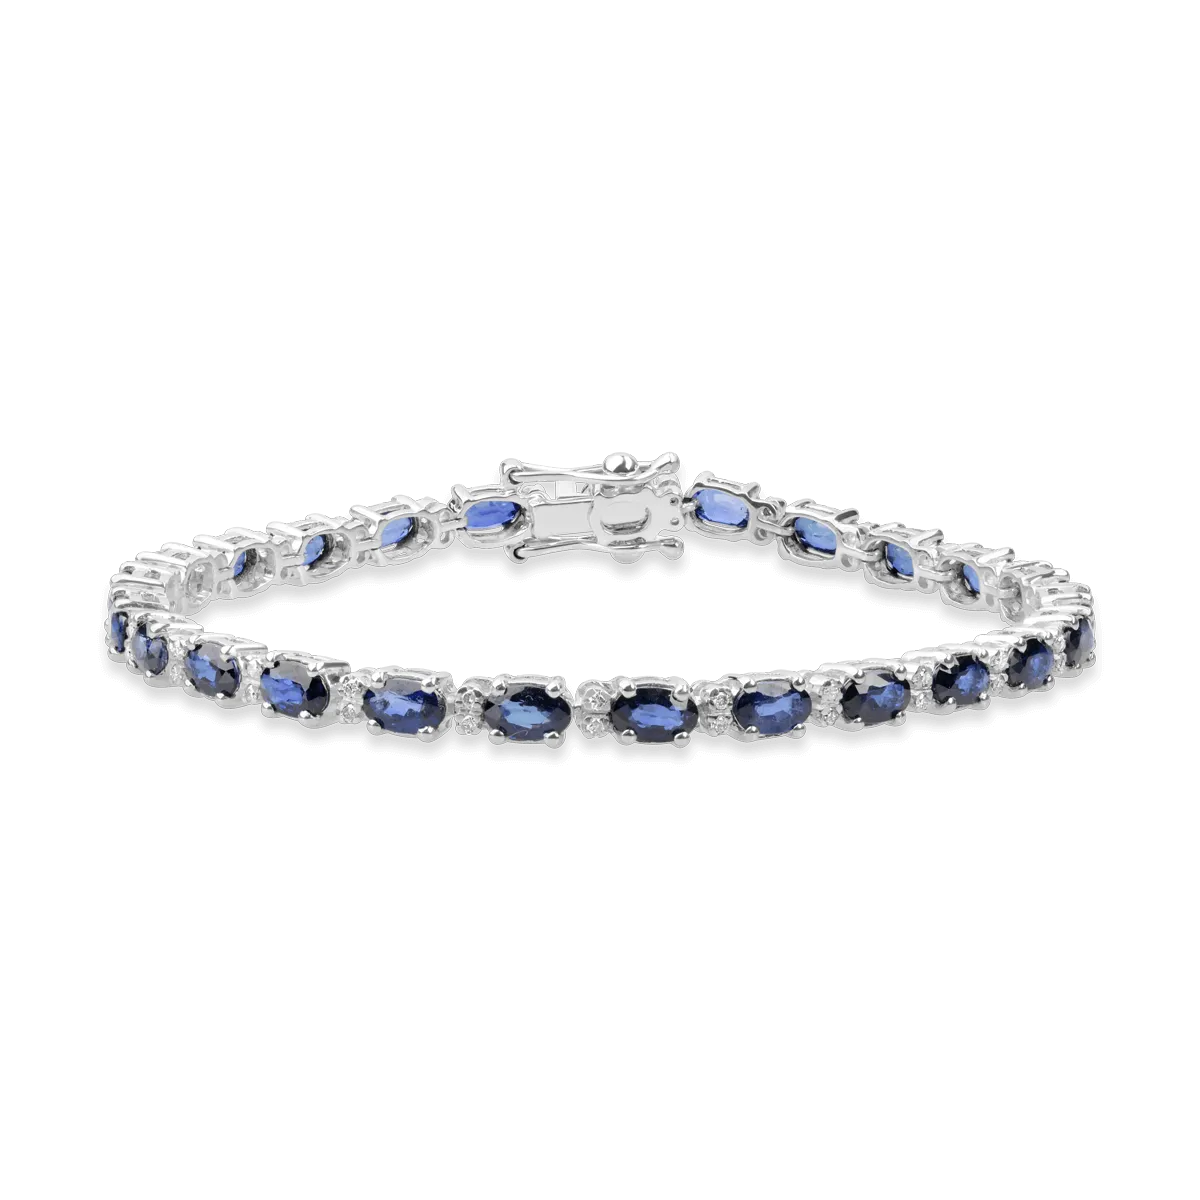 18K white gold bracelet with 8.73ct treated sapphires and 0.27ct diamonds